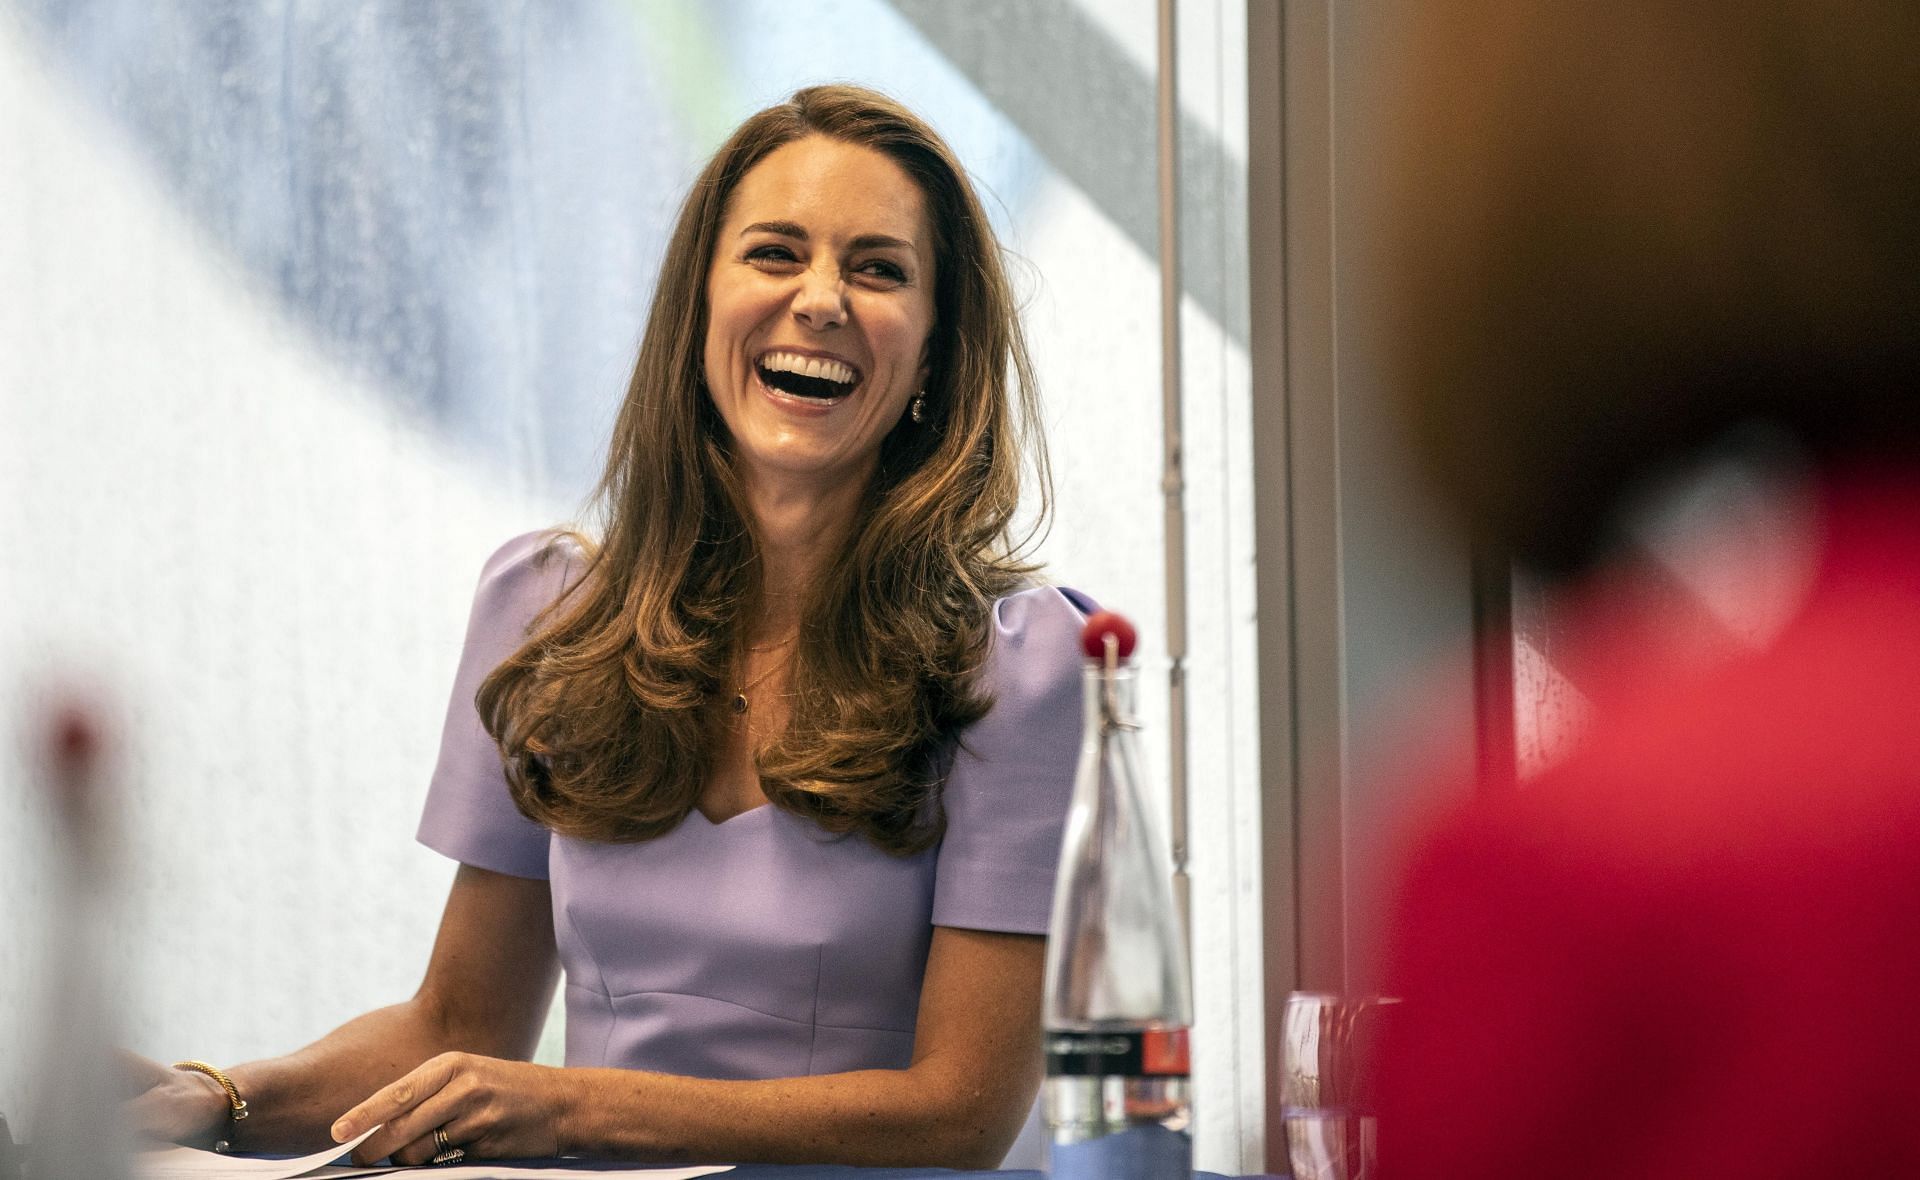 The Duchess Of Cambridge Launches The Royal Foundation Centre For Early Childhood (Image via Getty)